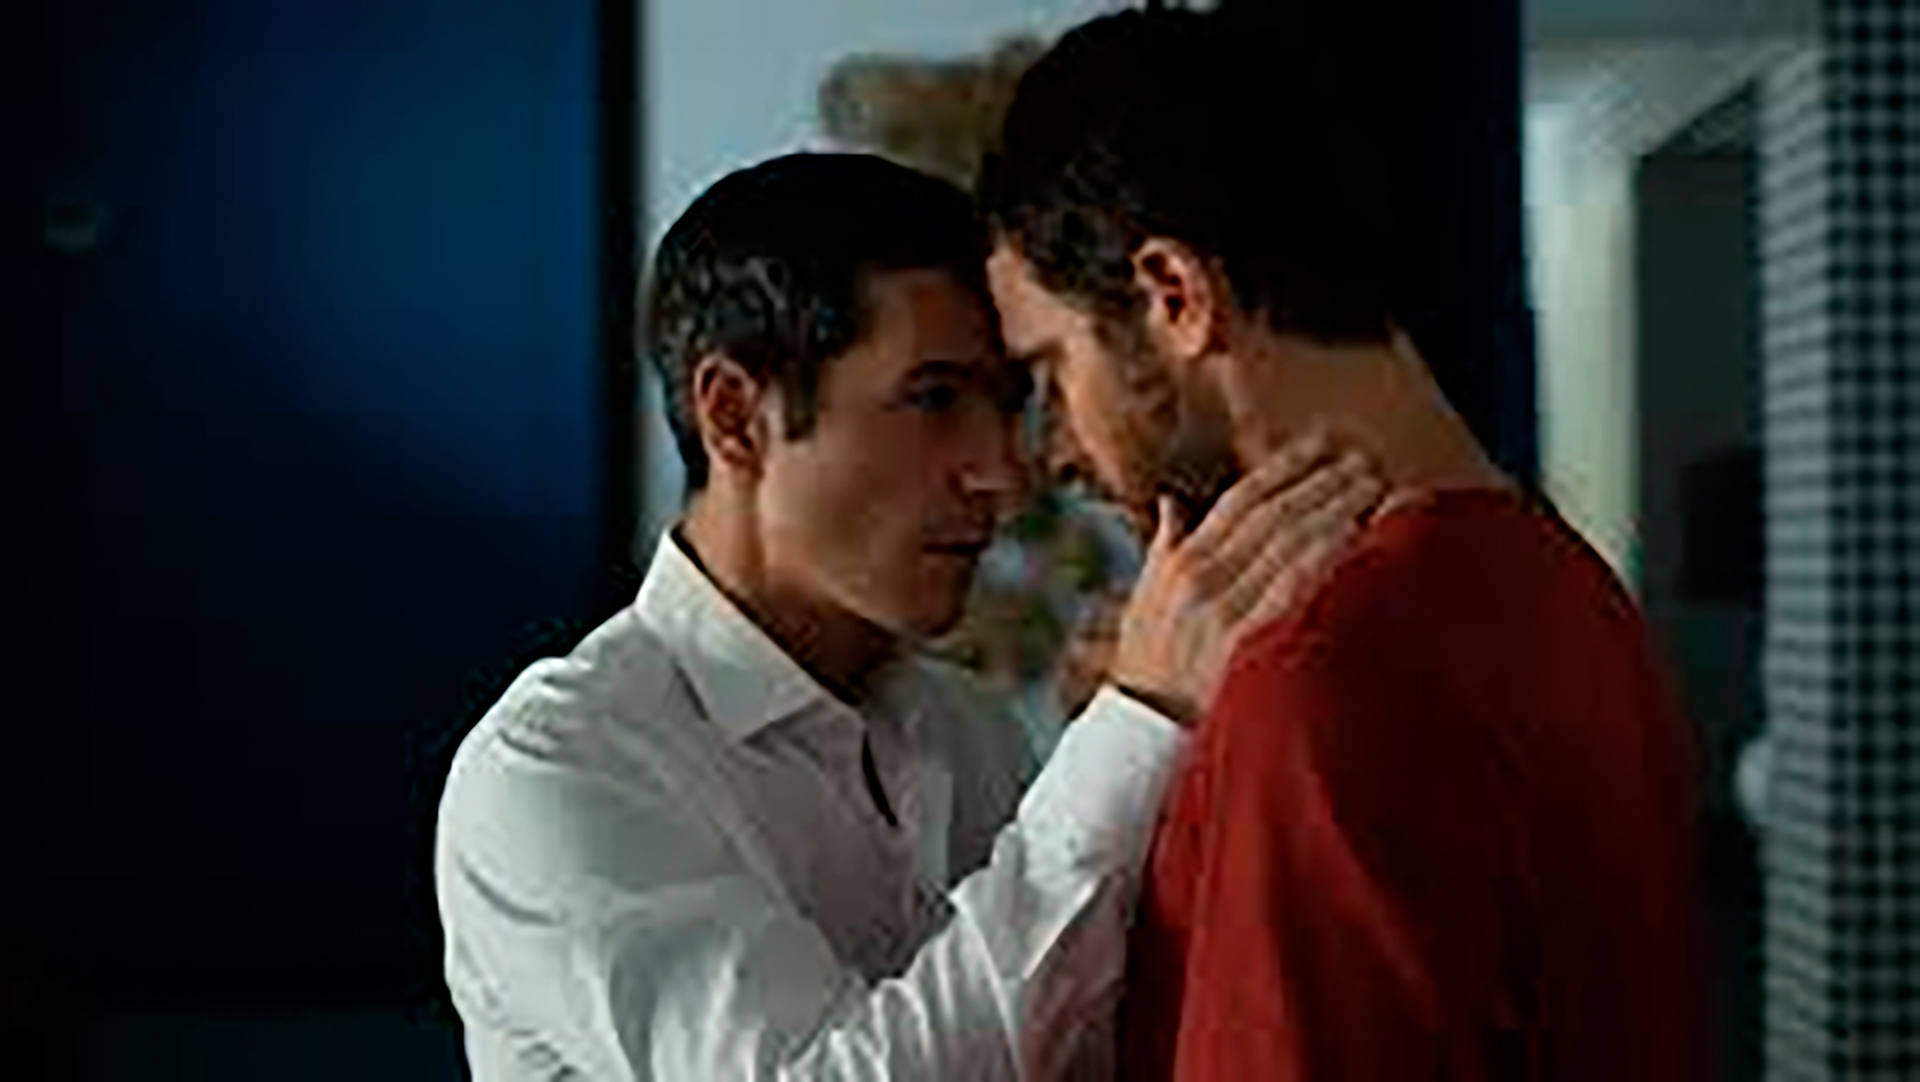 This is the first gay character that Mauricio Occhman plays in the cinema.  (Paramount+)